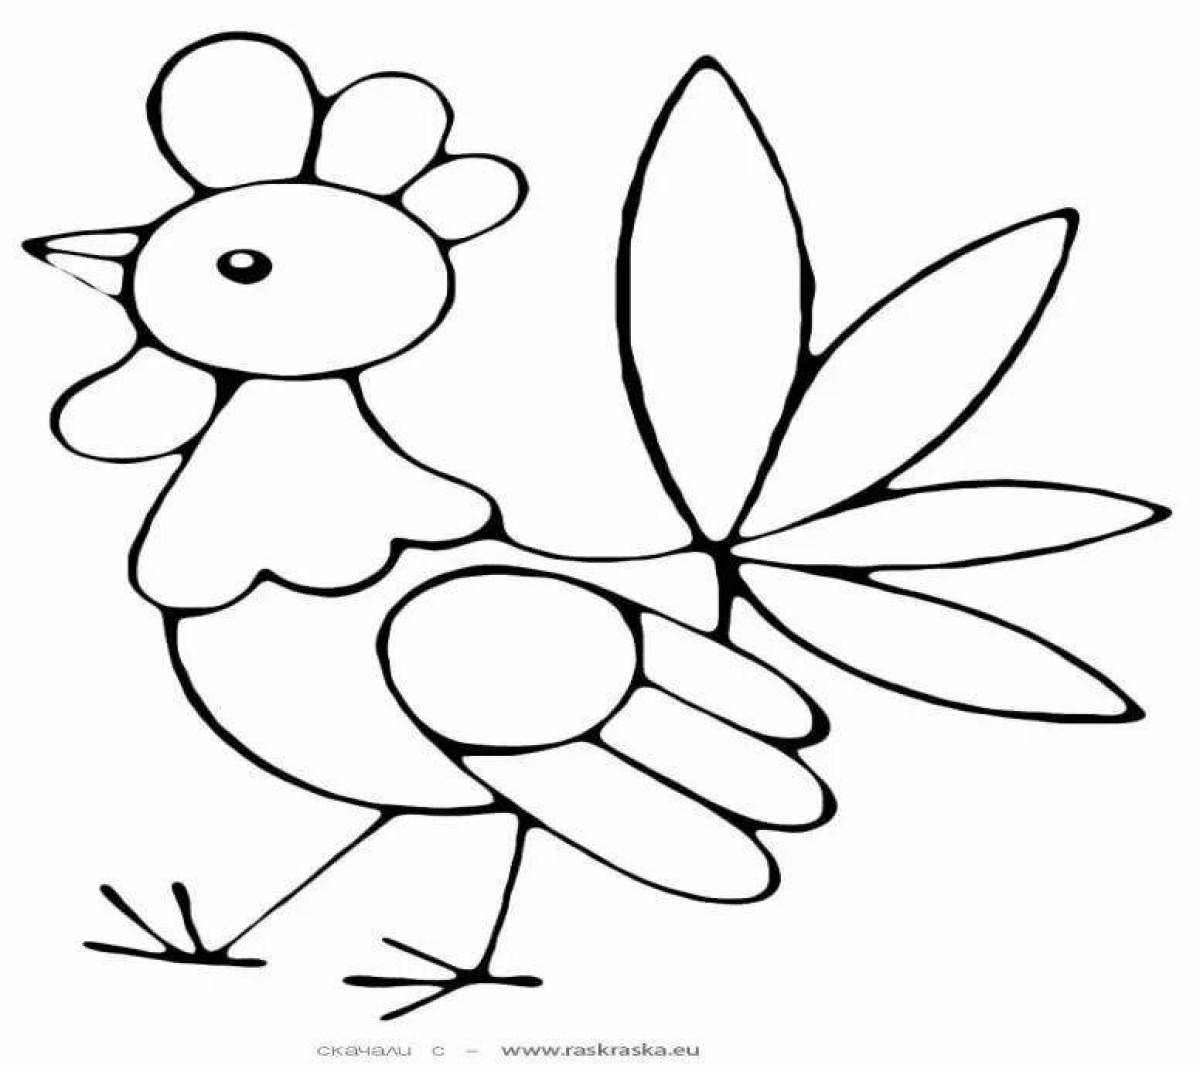 Colorful-delight coloring page 2 junior group